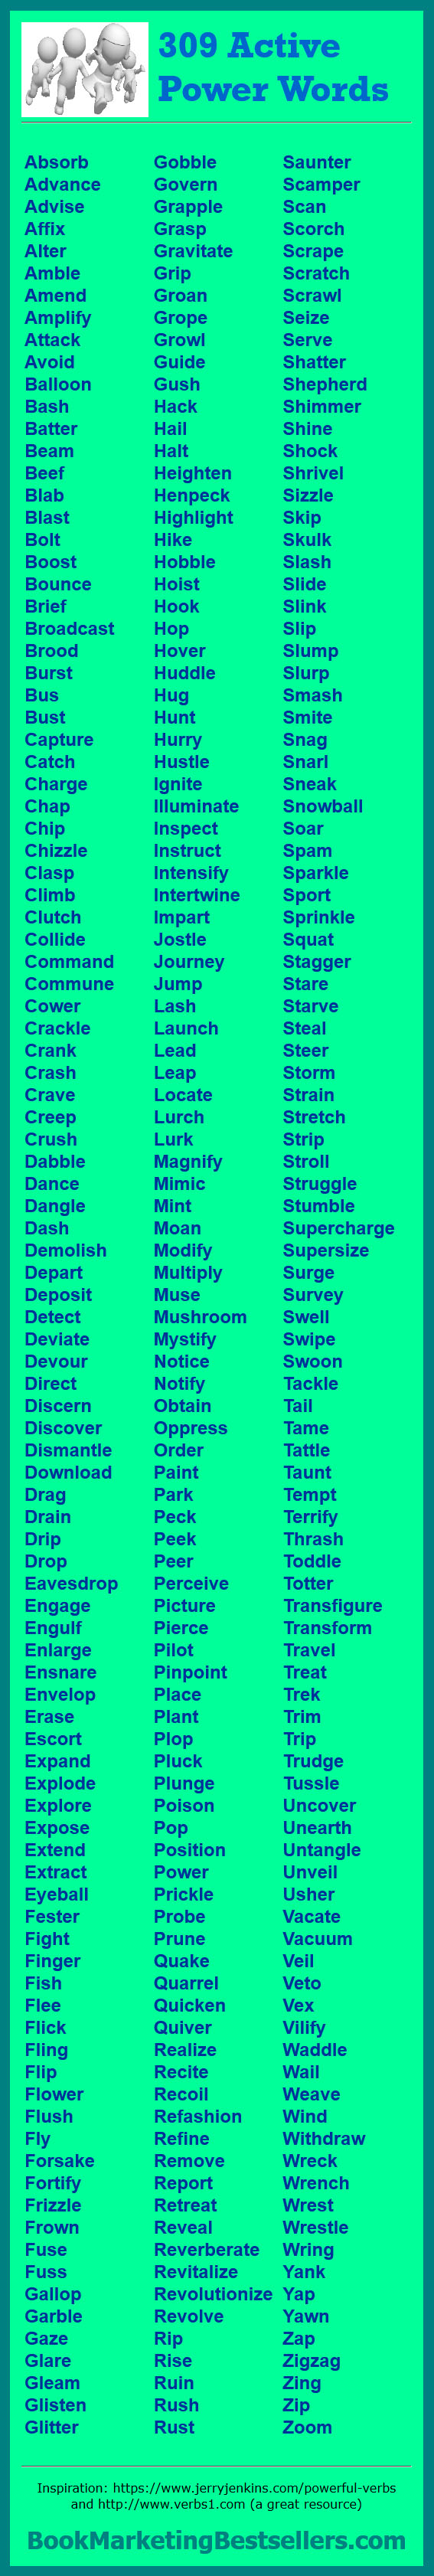 309 Active Power Words: Check out these 309 active verbs that will supercharge your writing. Use them.